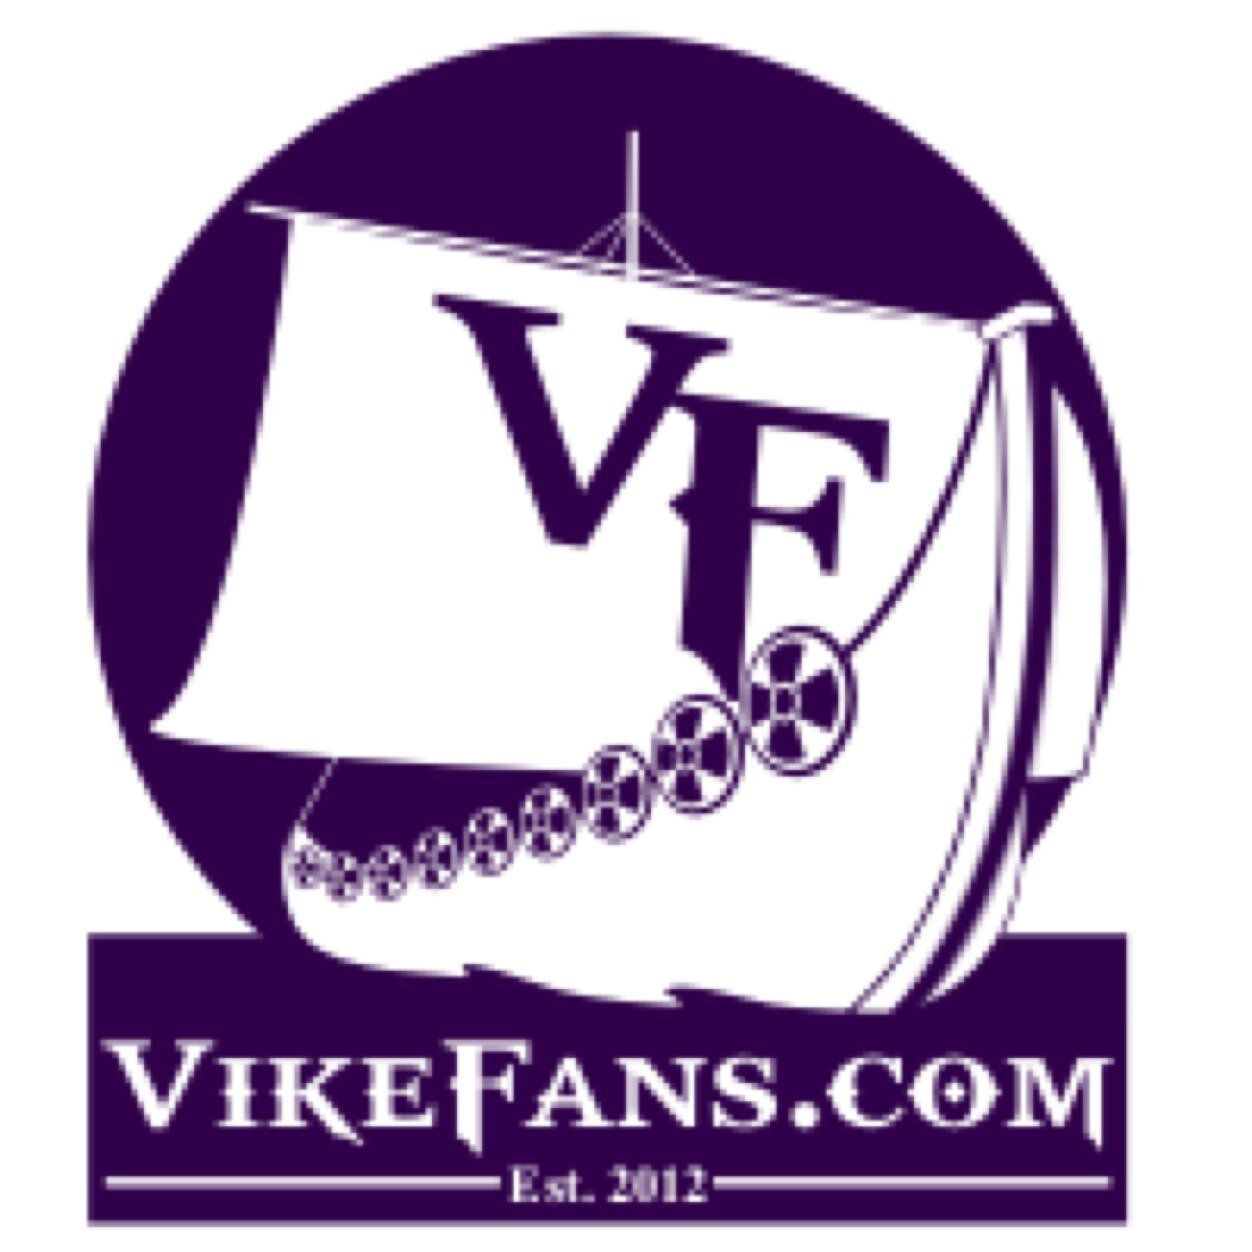 We are your bridge from the Viking past to the present. Classic Viking memories (video/photos/stories) and current content.  https://t.co/la3Cv9NytS